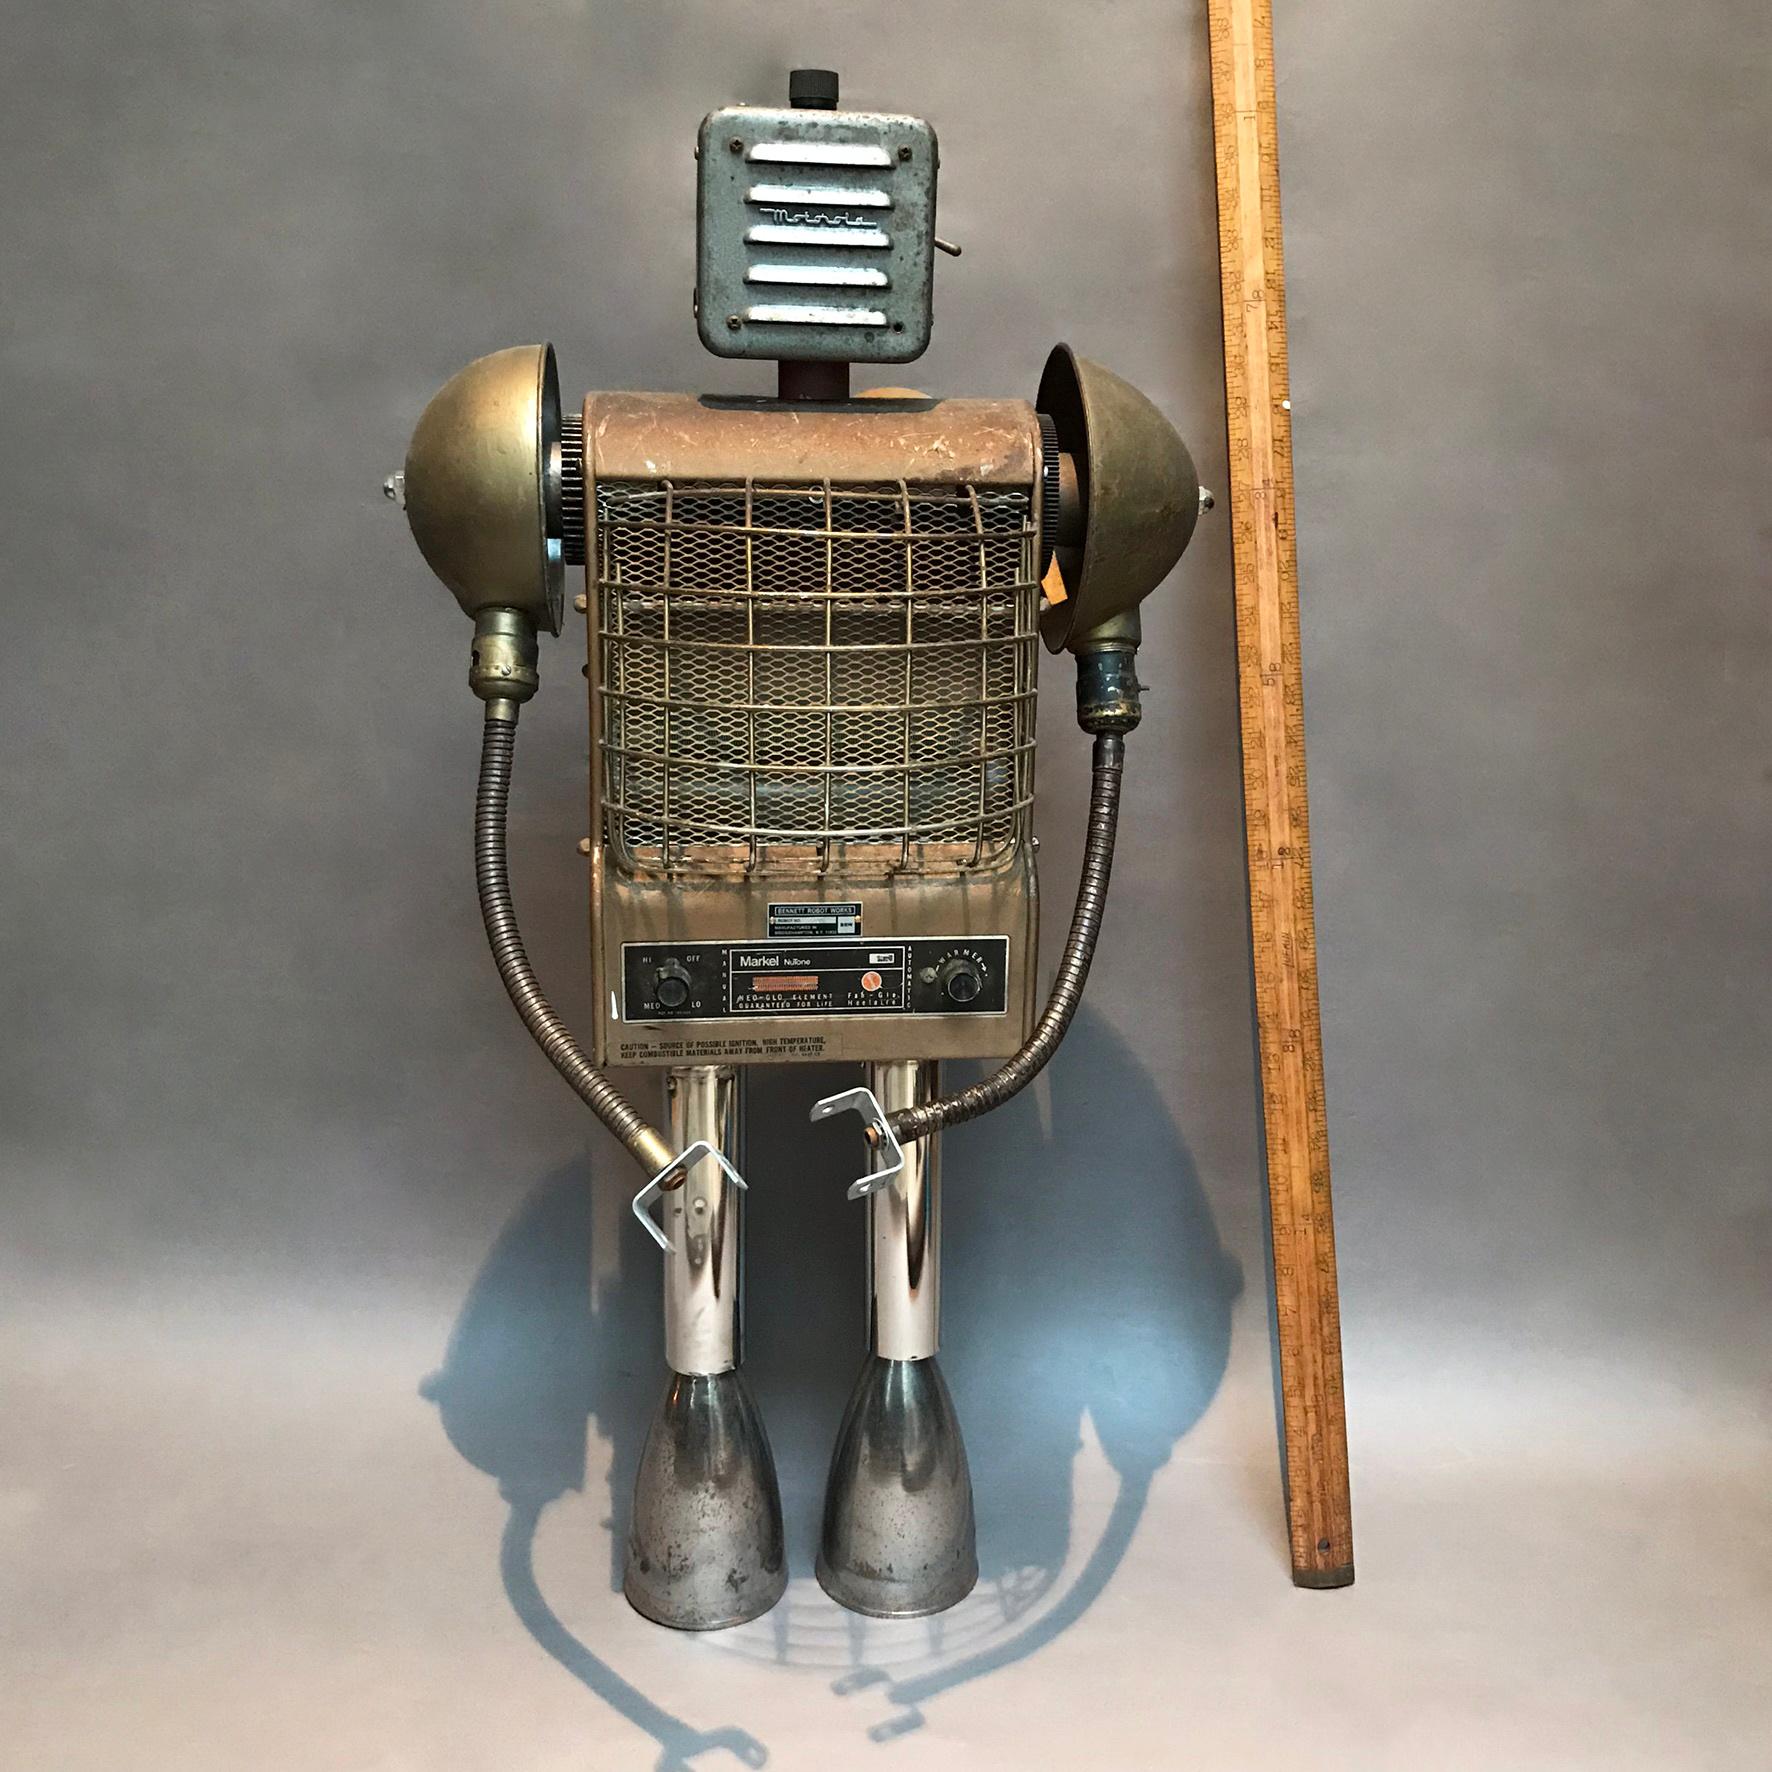 Custom robot sculpture named Markel by Bennett Robot Works, Brooklyn, NY

Bennett Robot Works, robot sculptures created by Gordon Bennett, are composed of found, vintage objects used in their unaltered entirety. They are inspired by Norman Bel